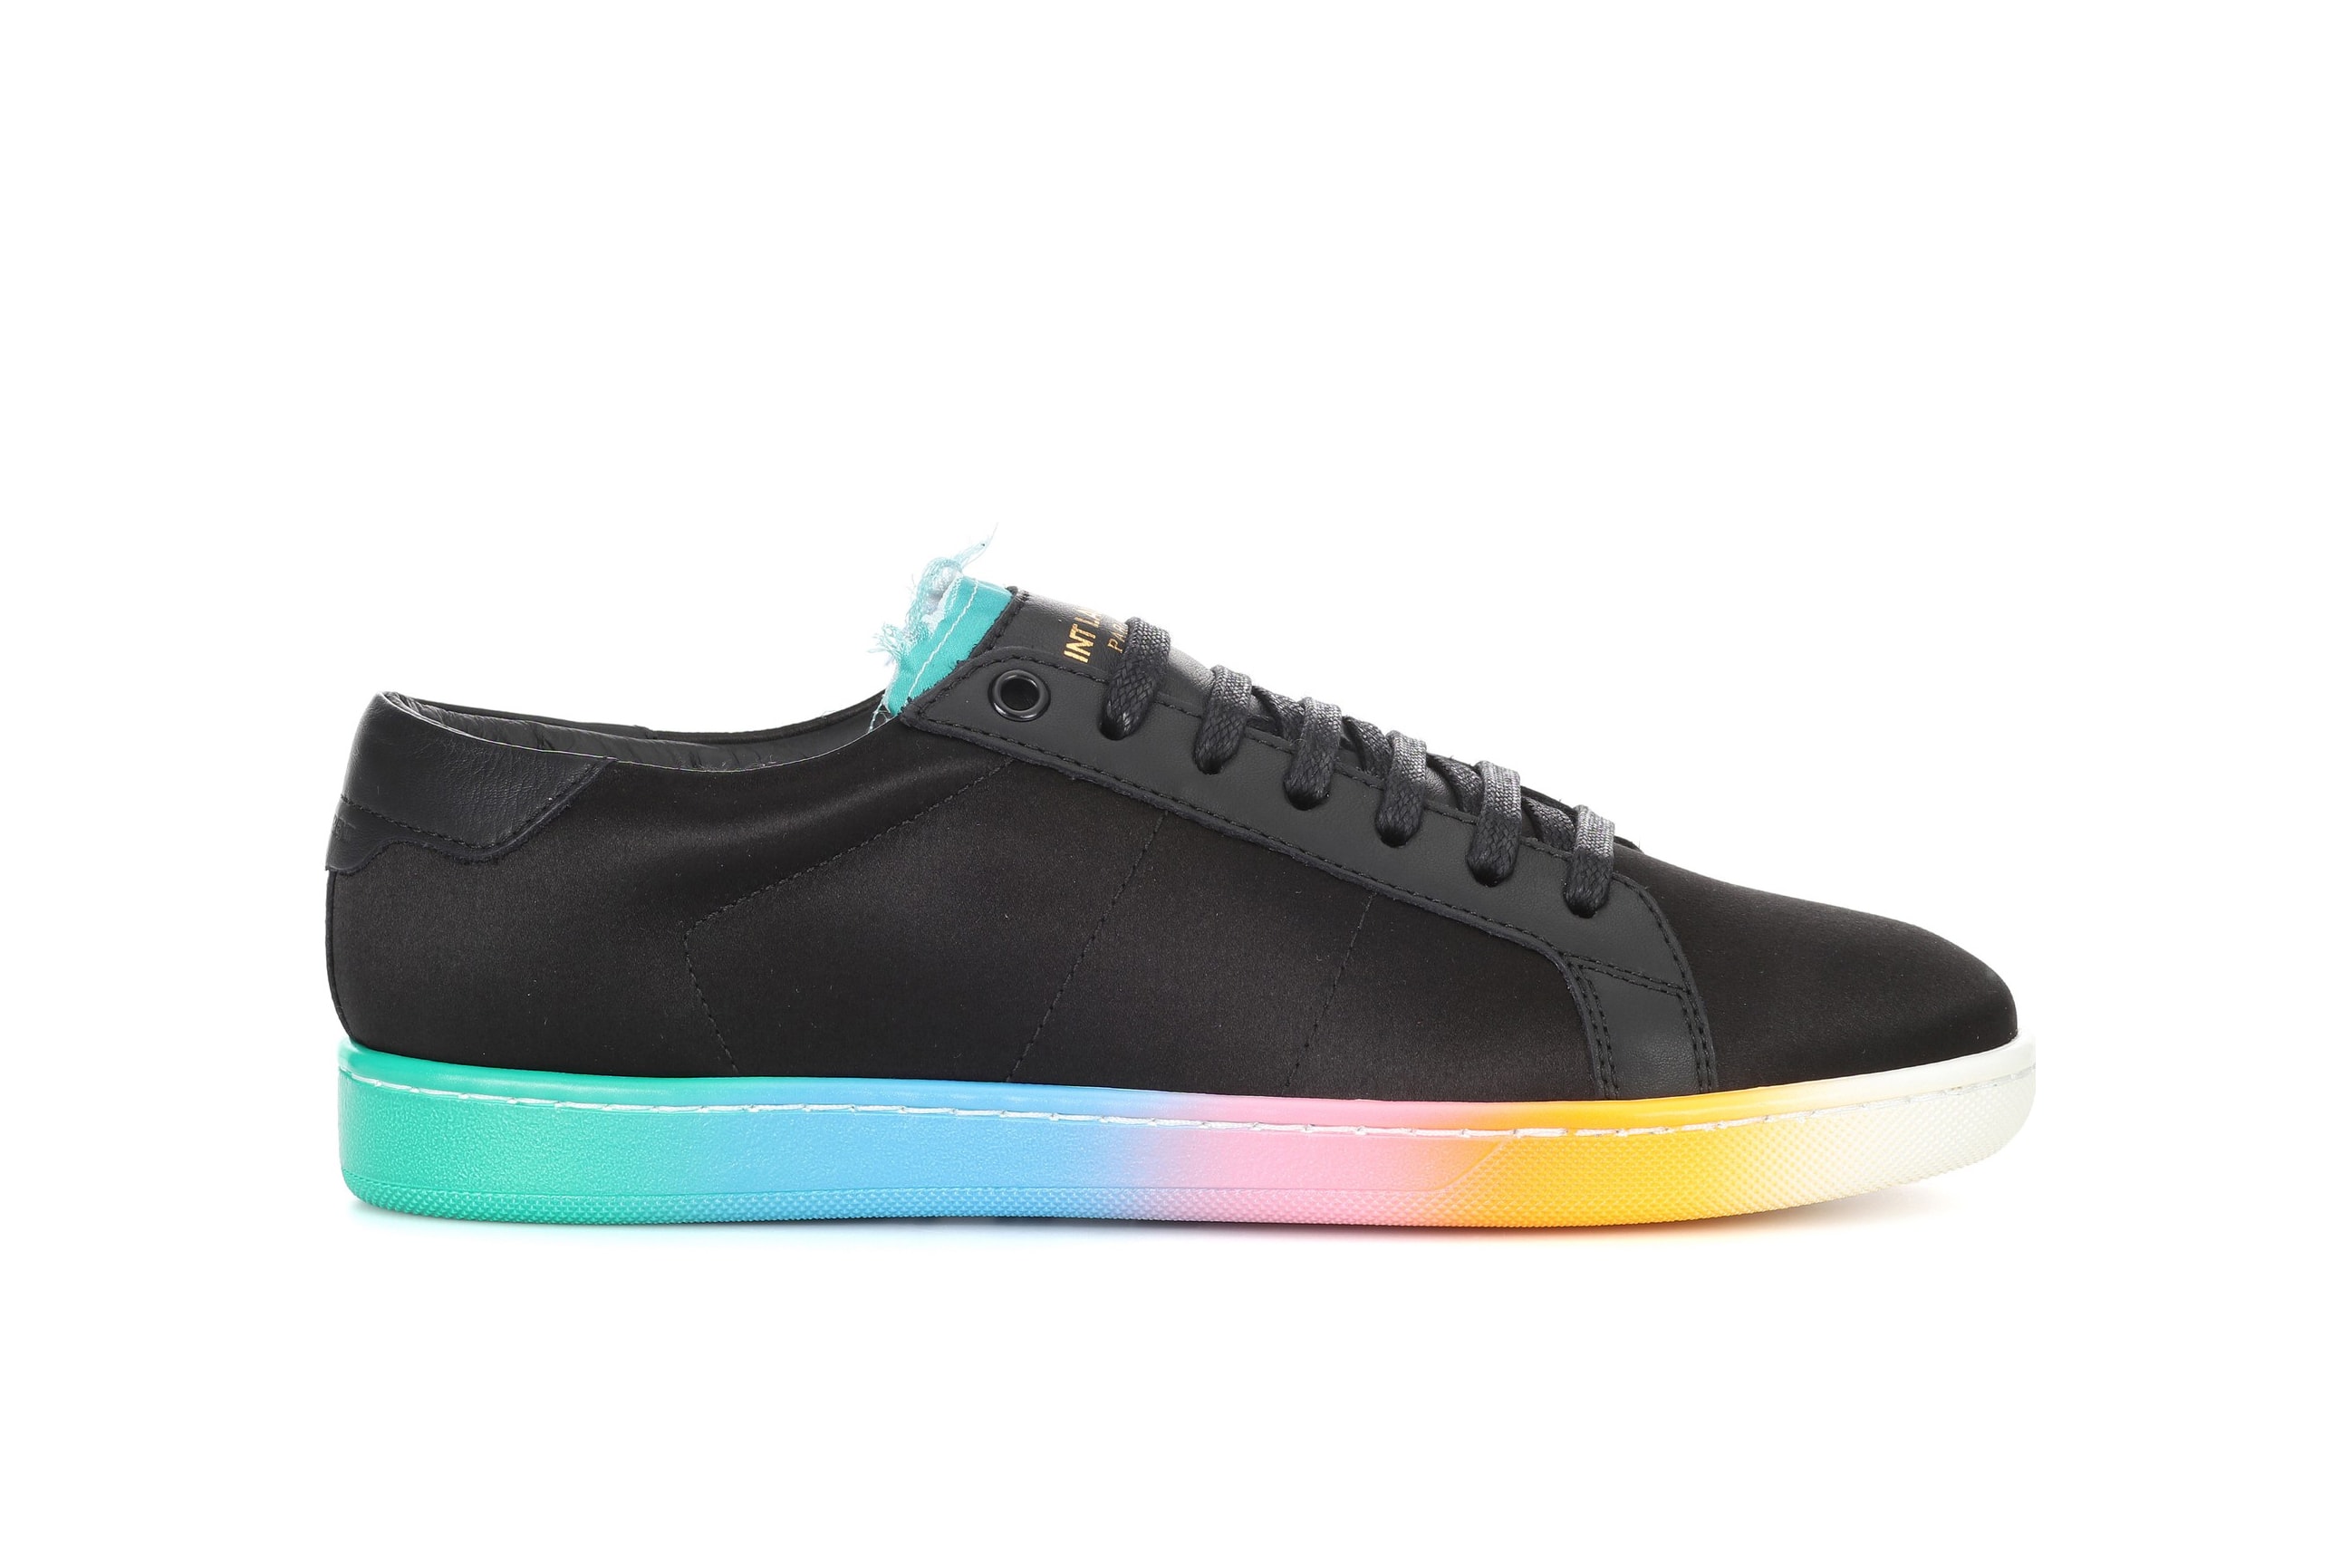 Saint Laurent Black Leather Satin Rainbow Sole Sneaker Spring Summer Silhouette Blue Pink White Yellow